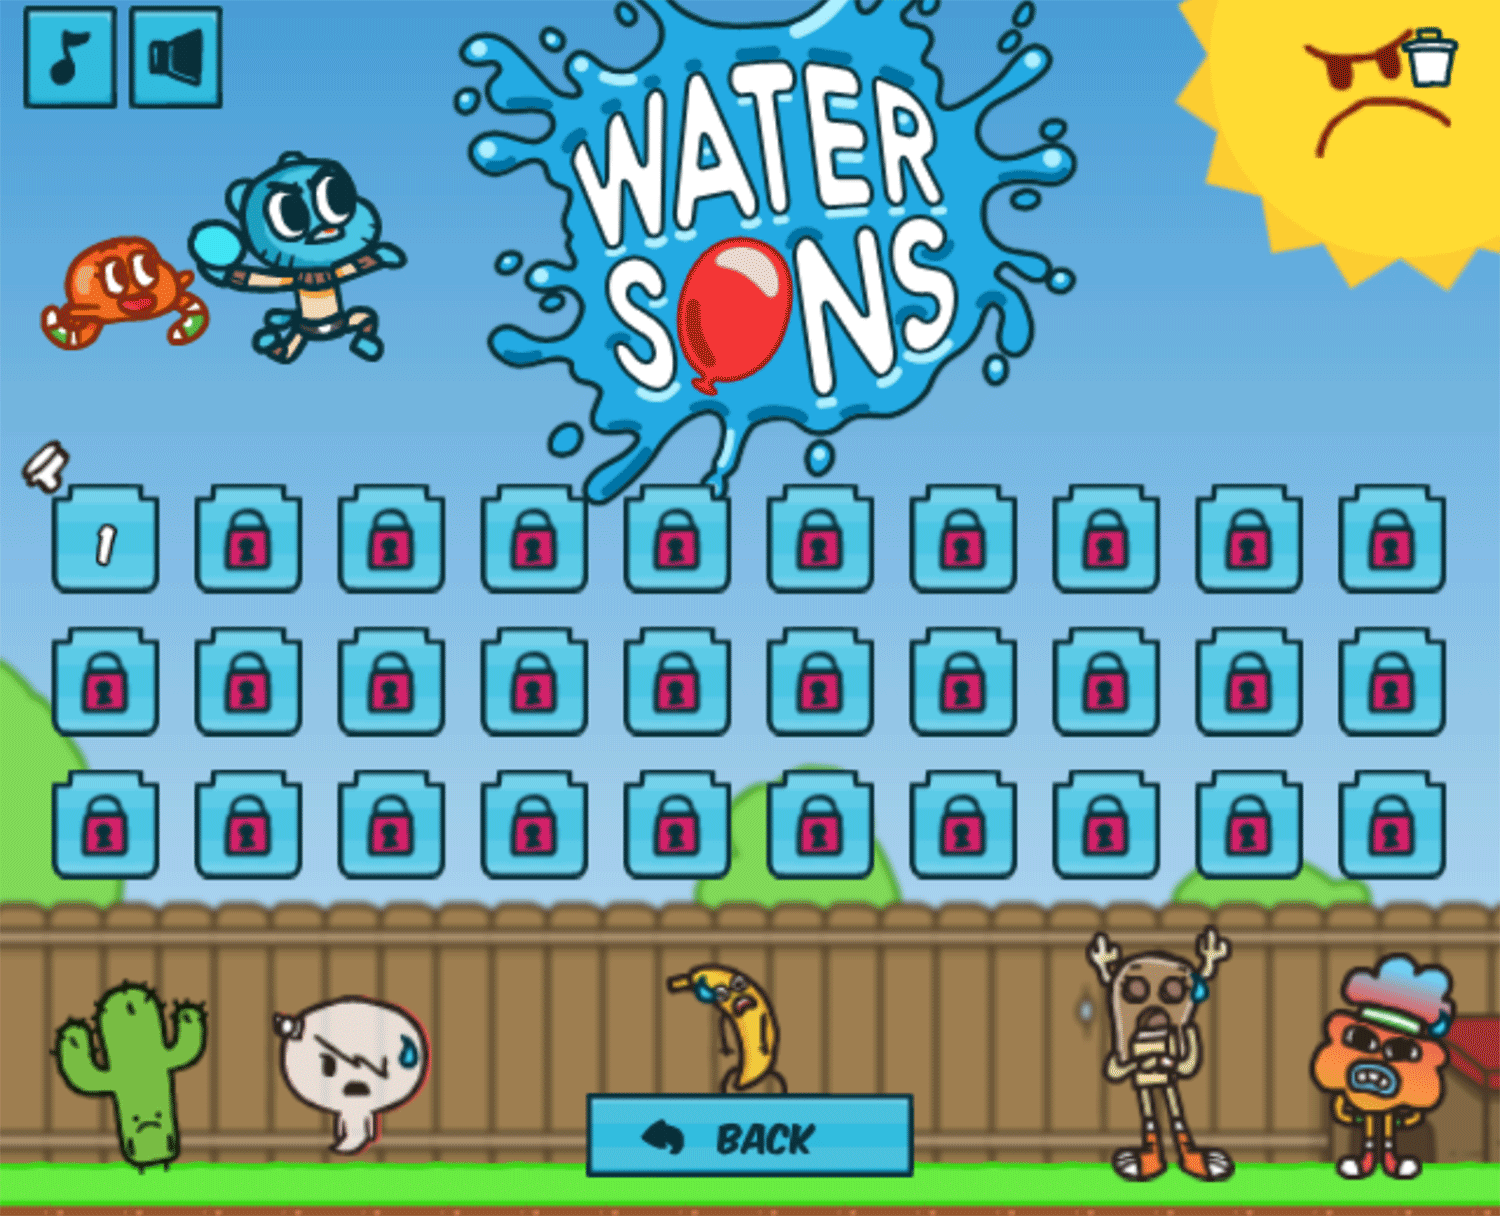 Amazing World of Gumball Water Sons Game Level Select Screenshot.